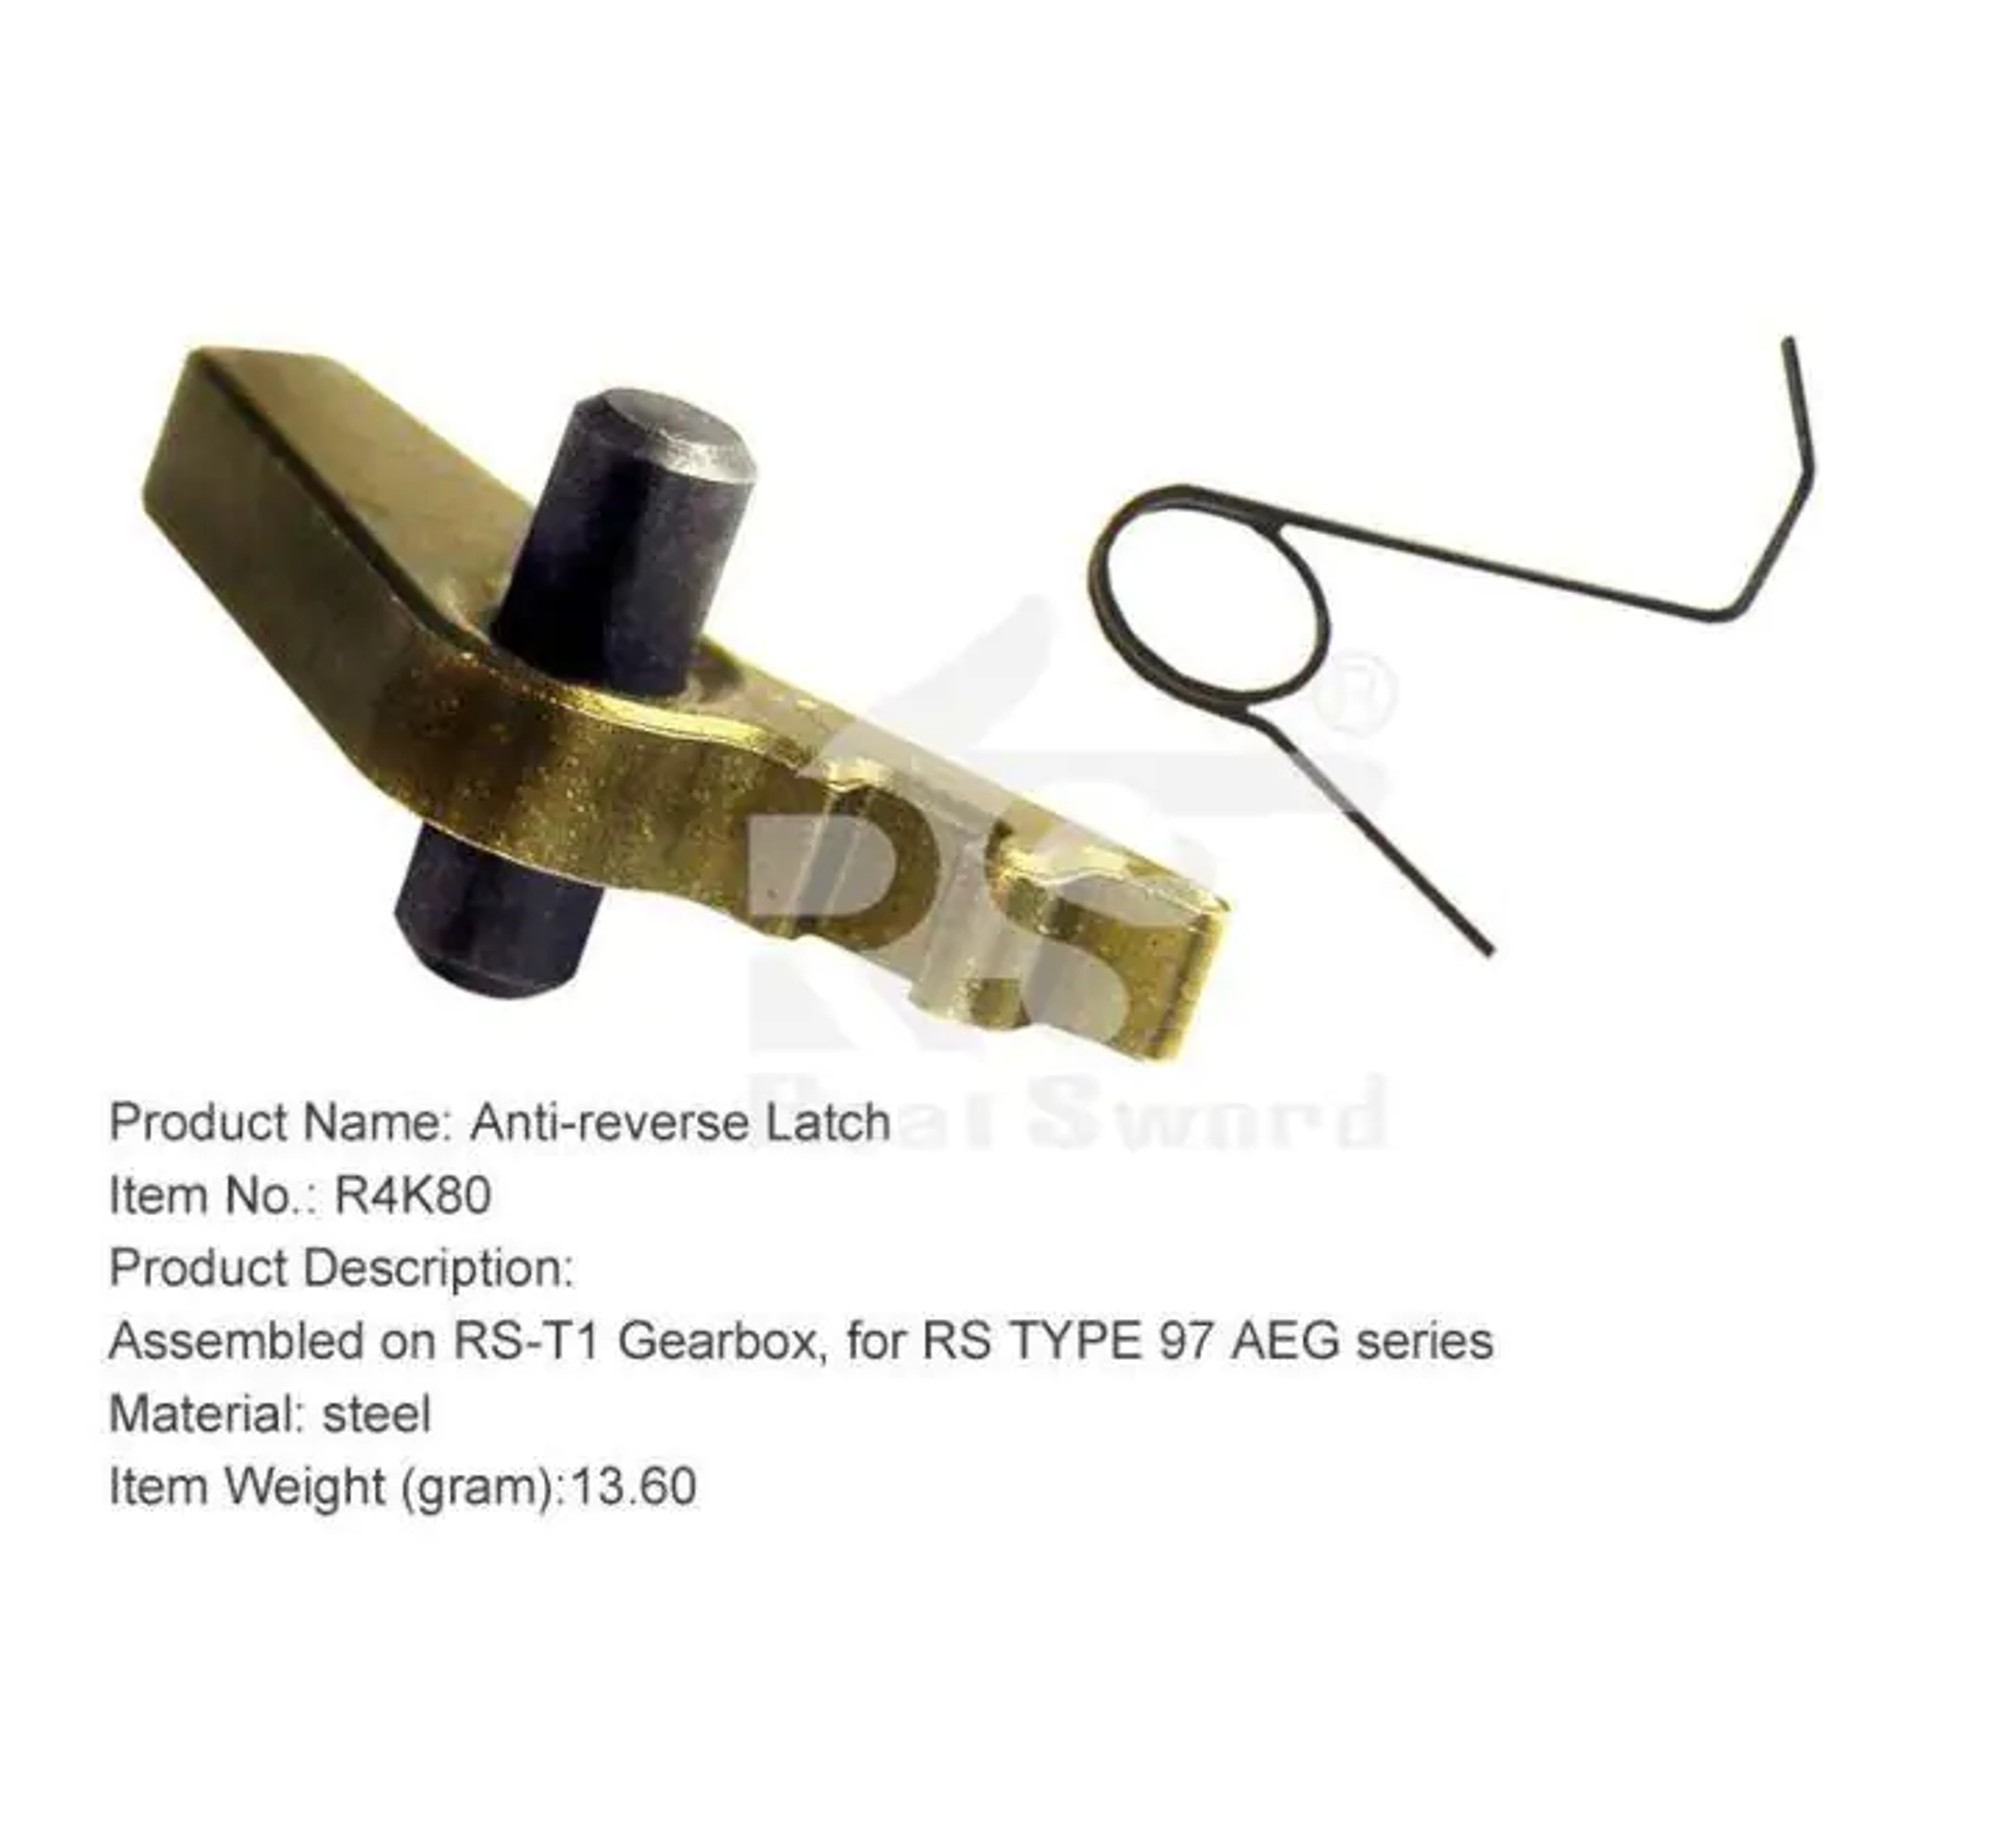 Real Sword Anti-Reverse Latch For Type 97 T1 Gearboxes